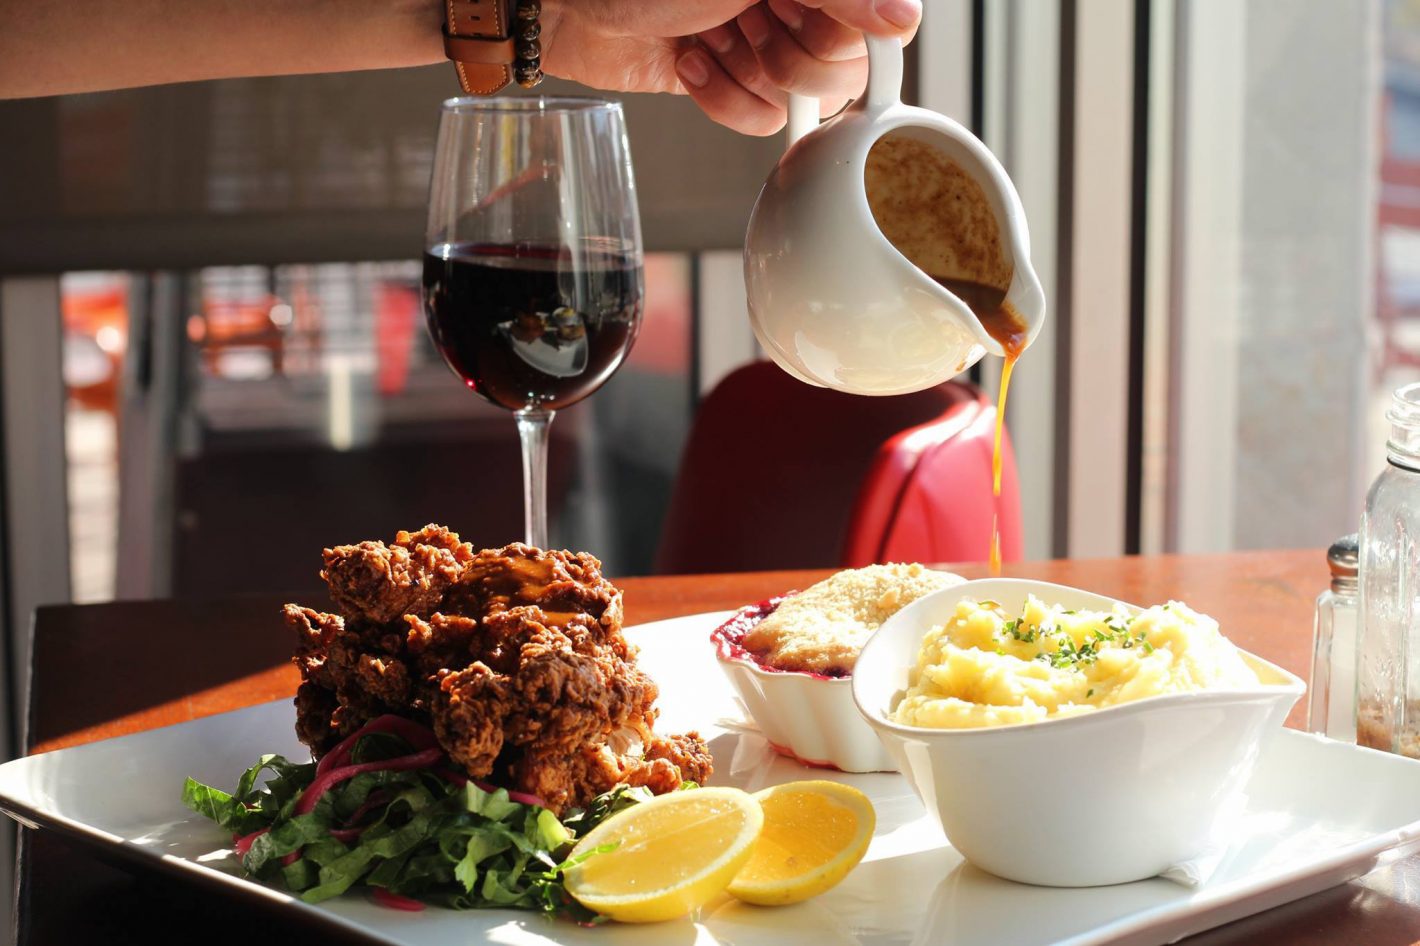 Roxy Launches Fried Chicken Sunday Dinner Deal